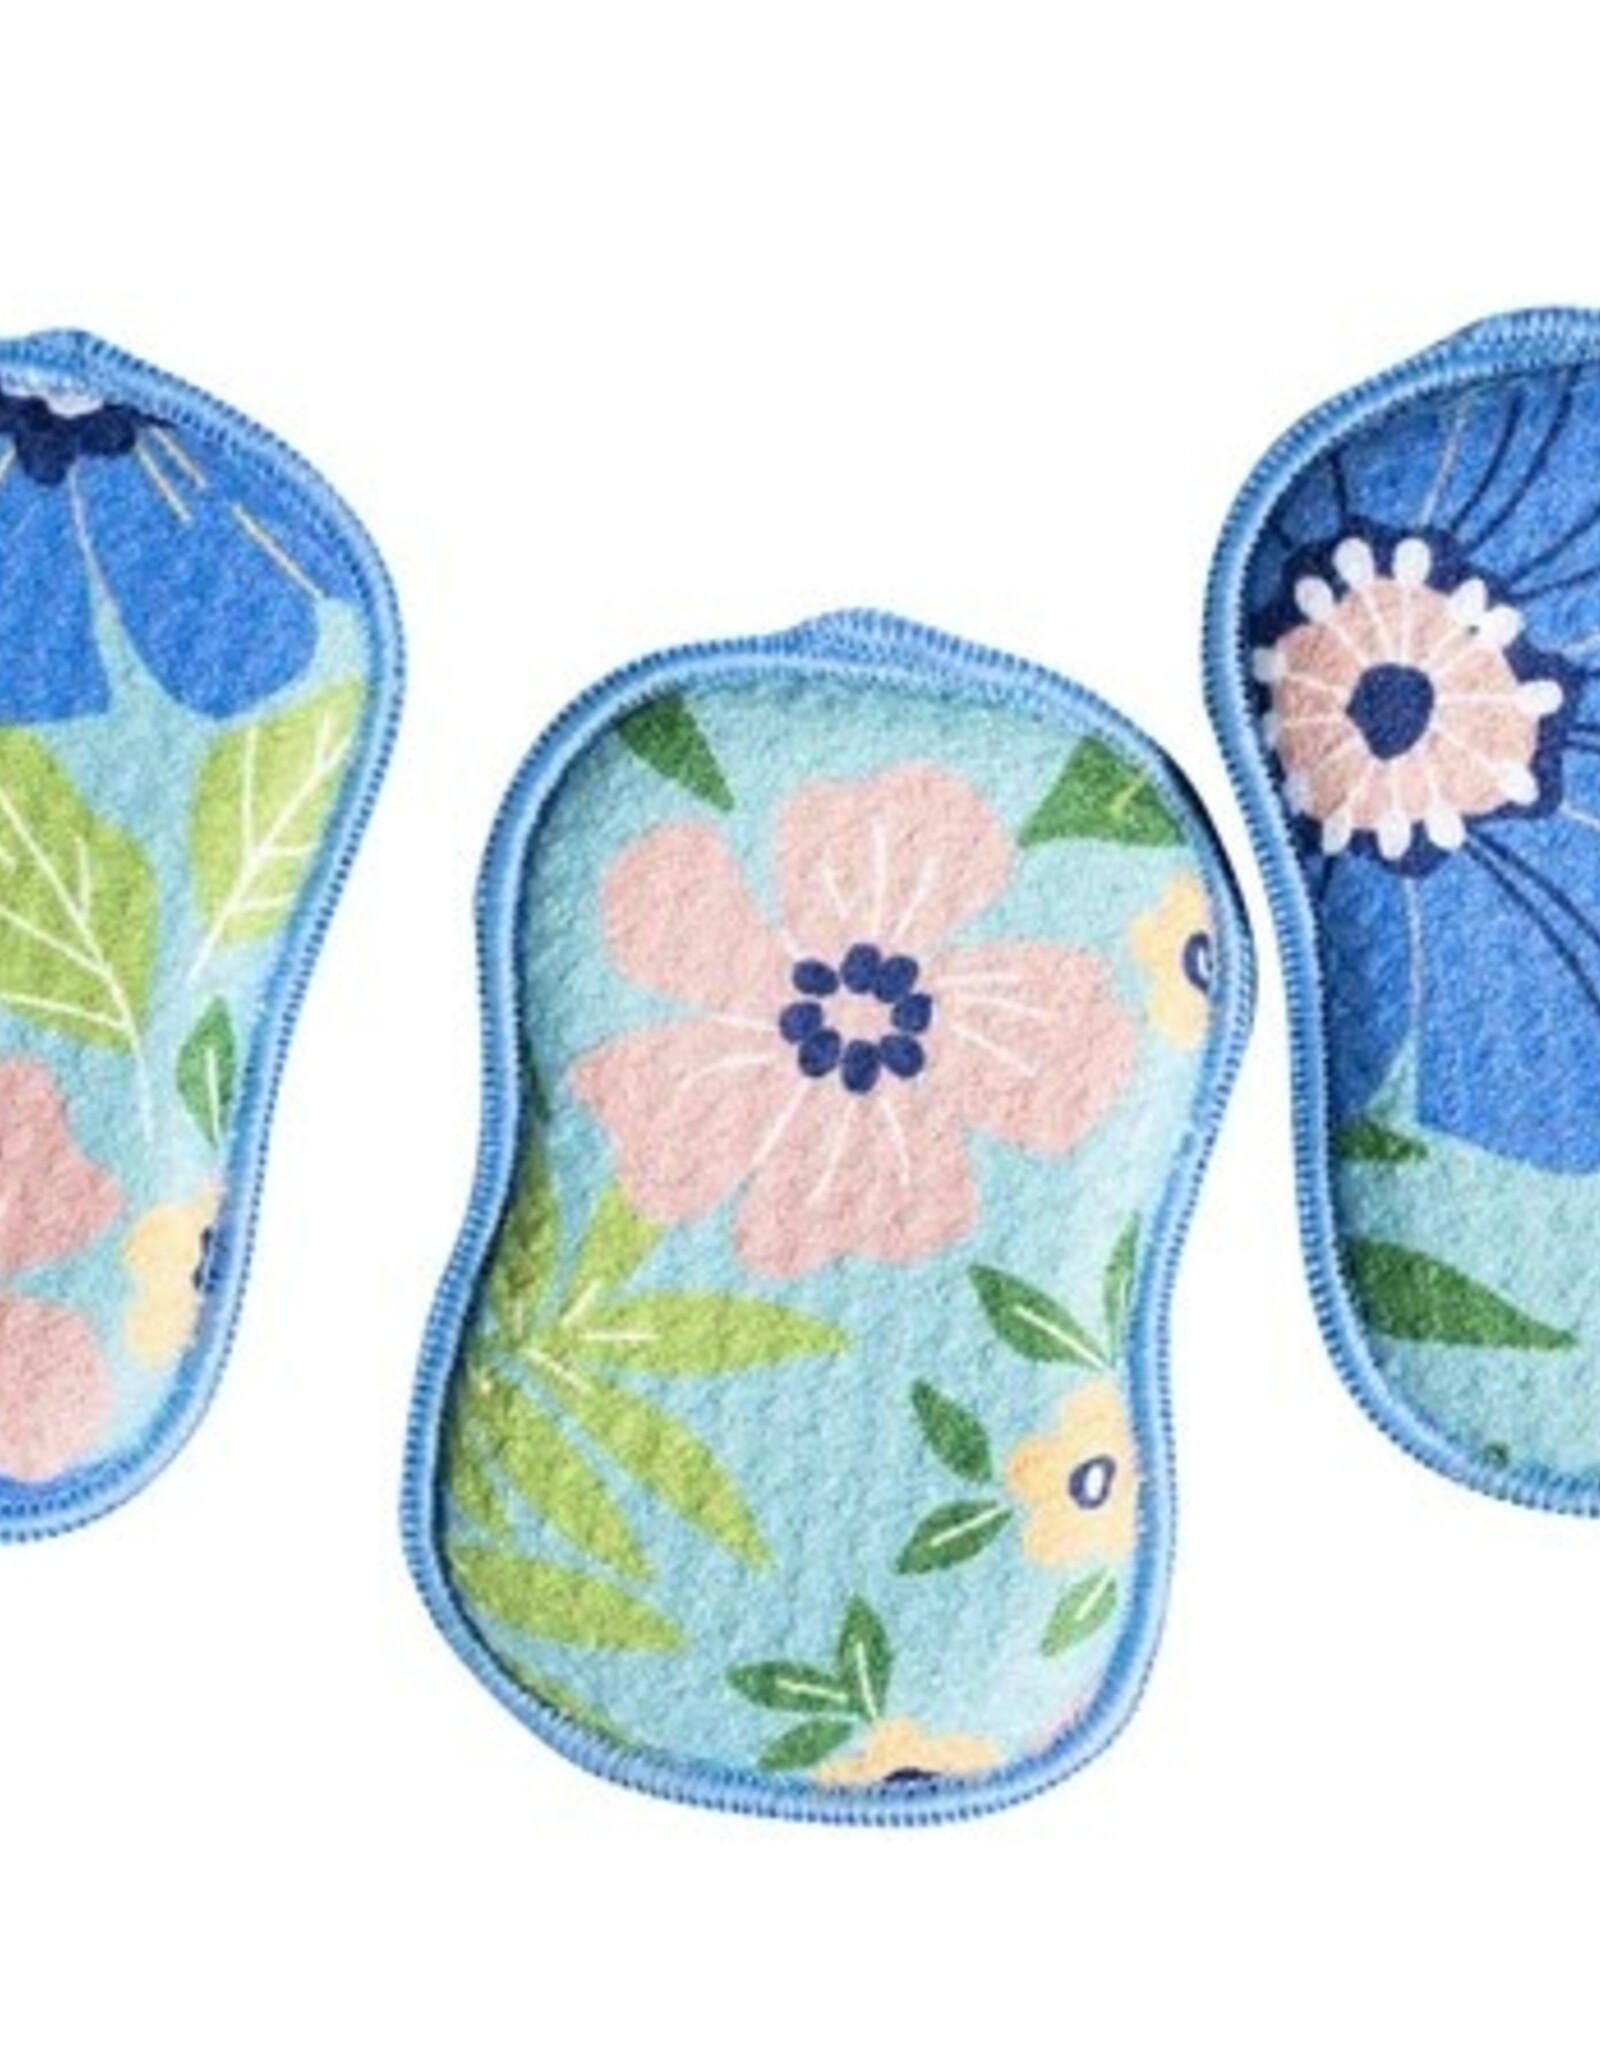 Once Again Home Co. RE:usable Sponges (Set of 3) -